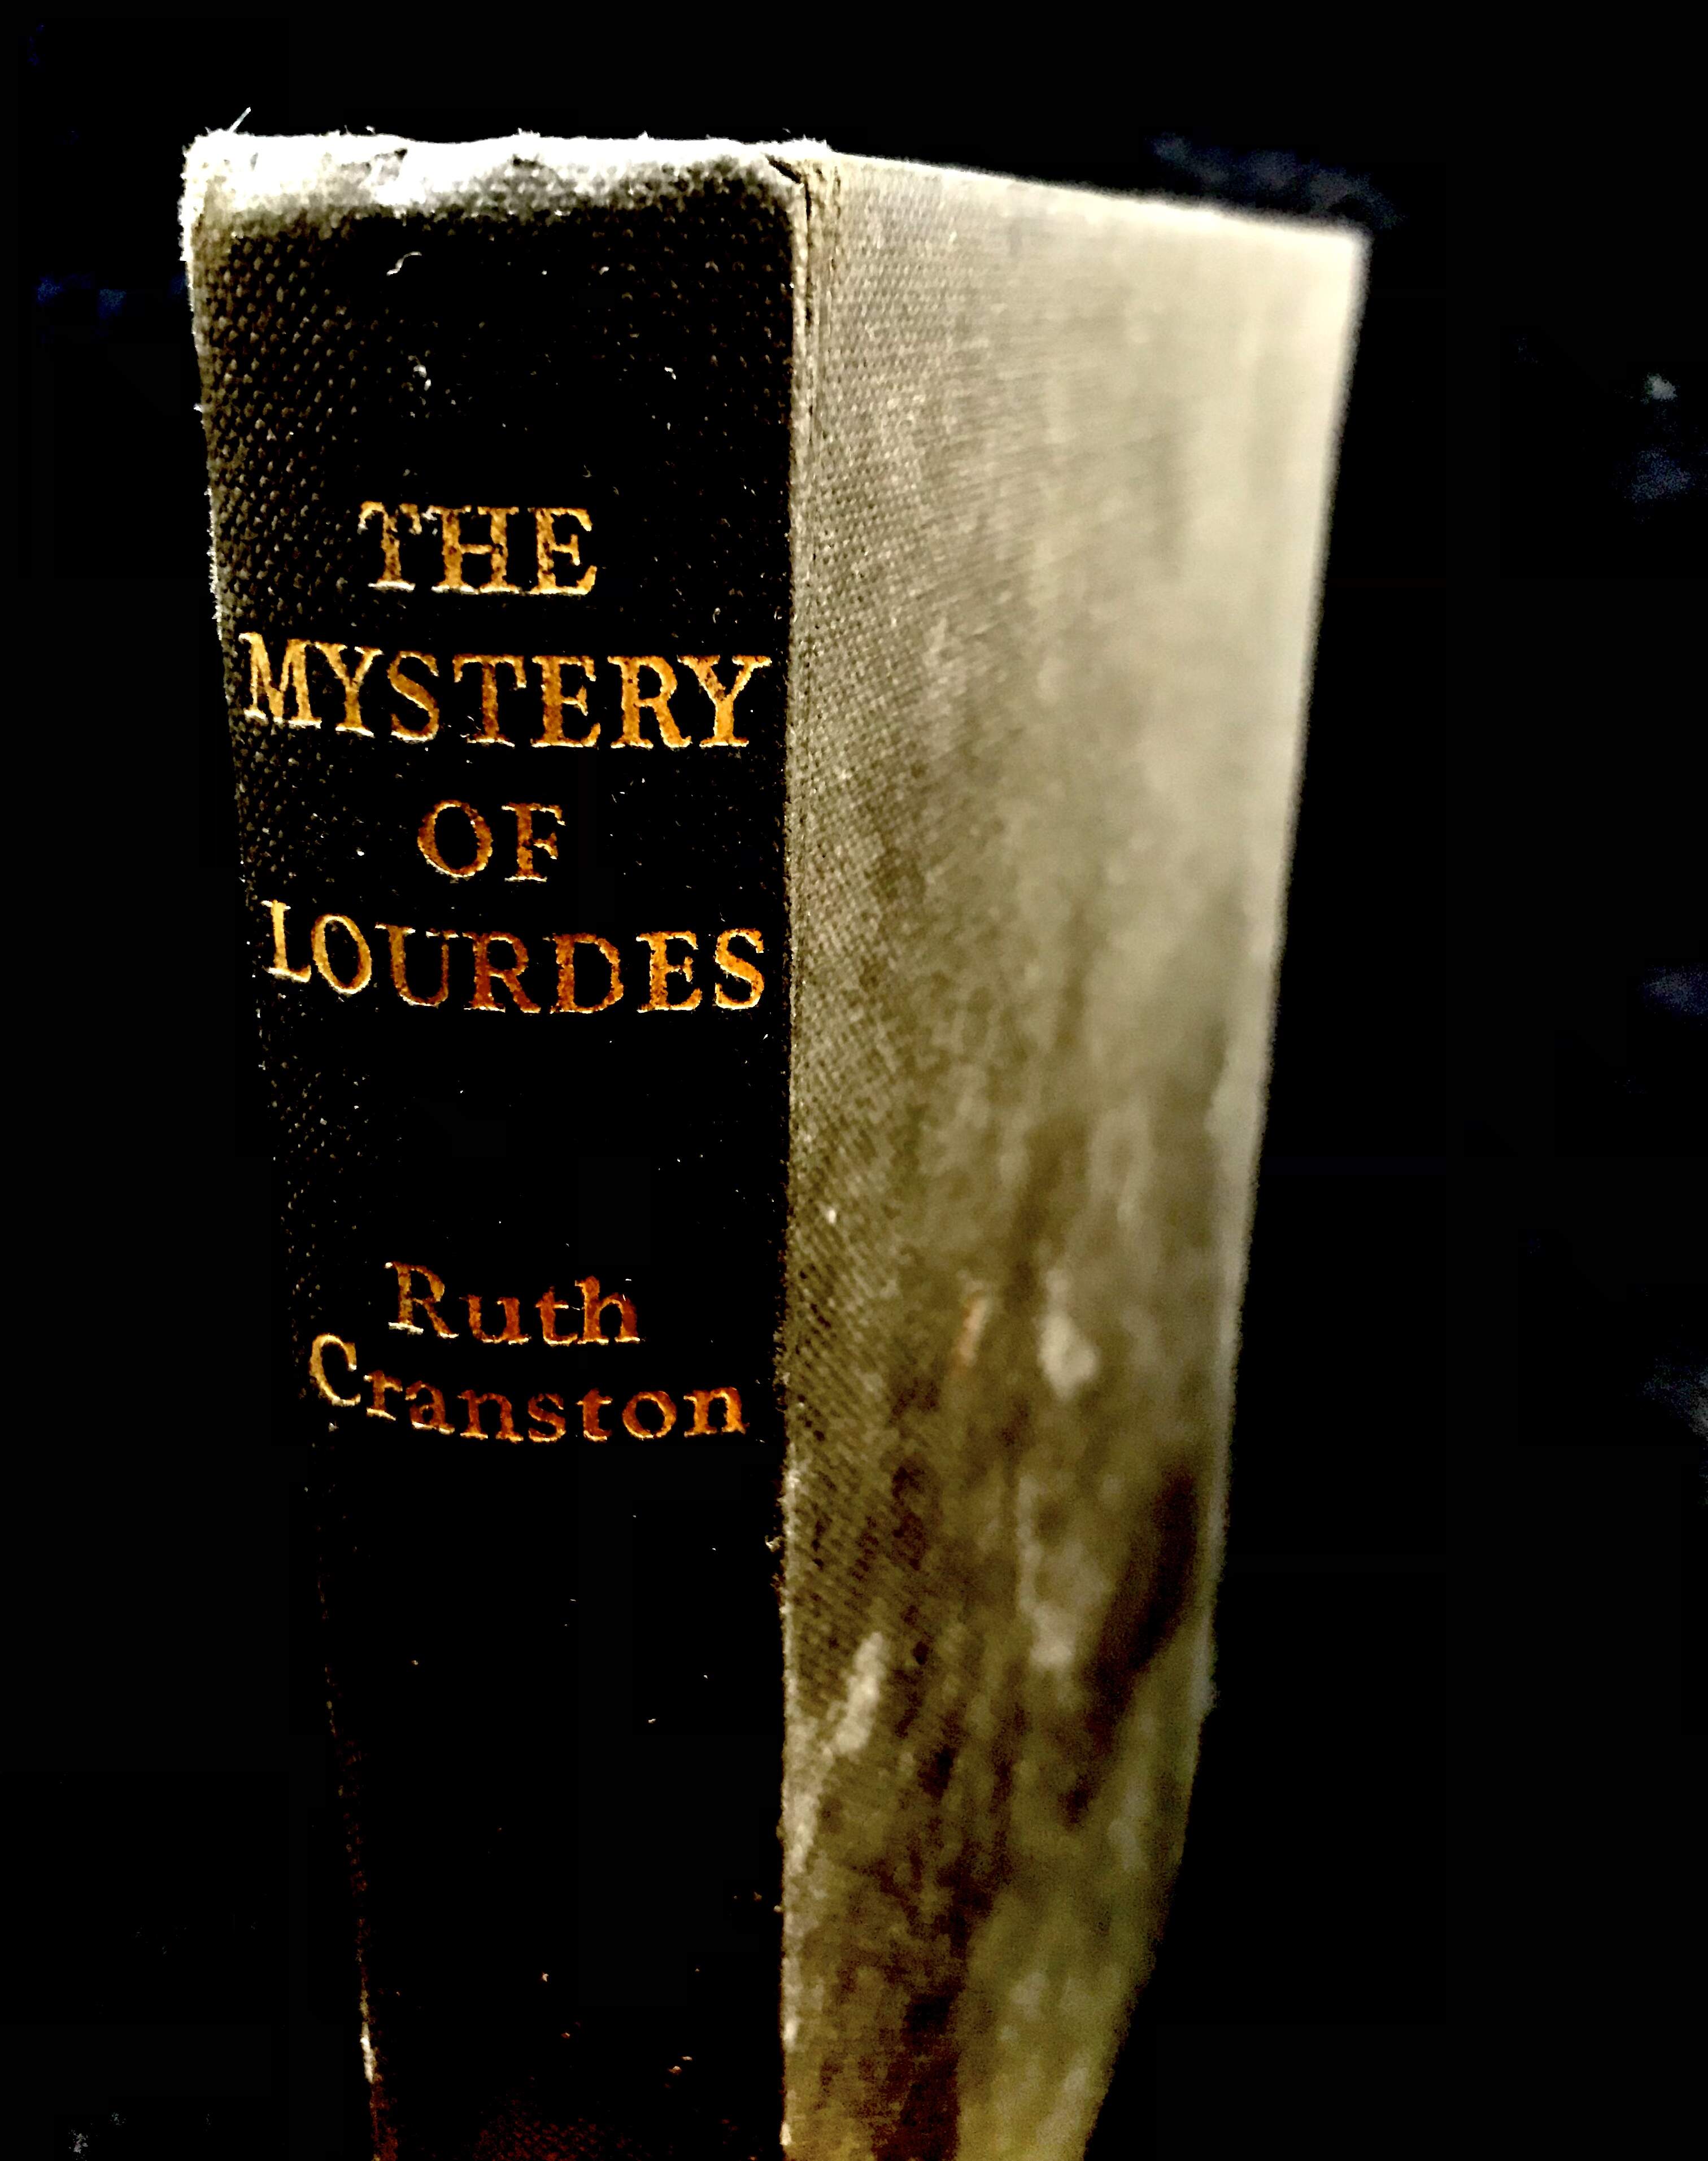 The Mystery of Lourdes by Ruth Cranston